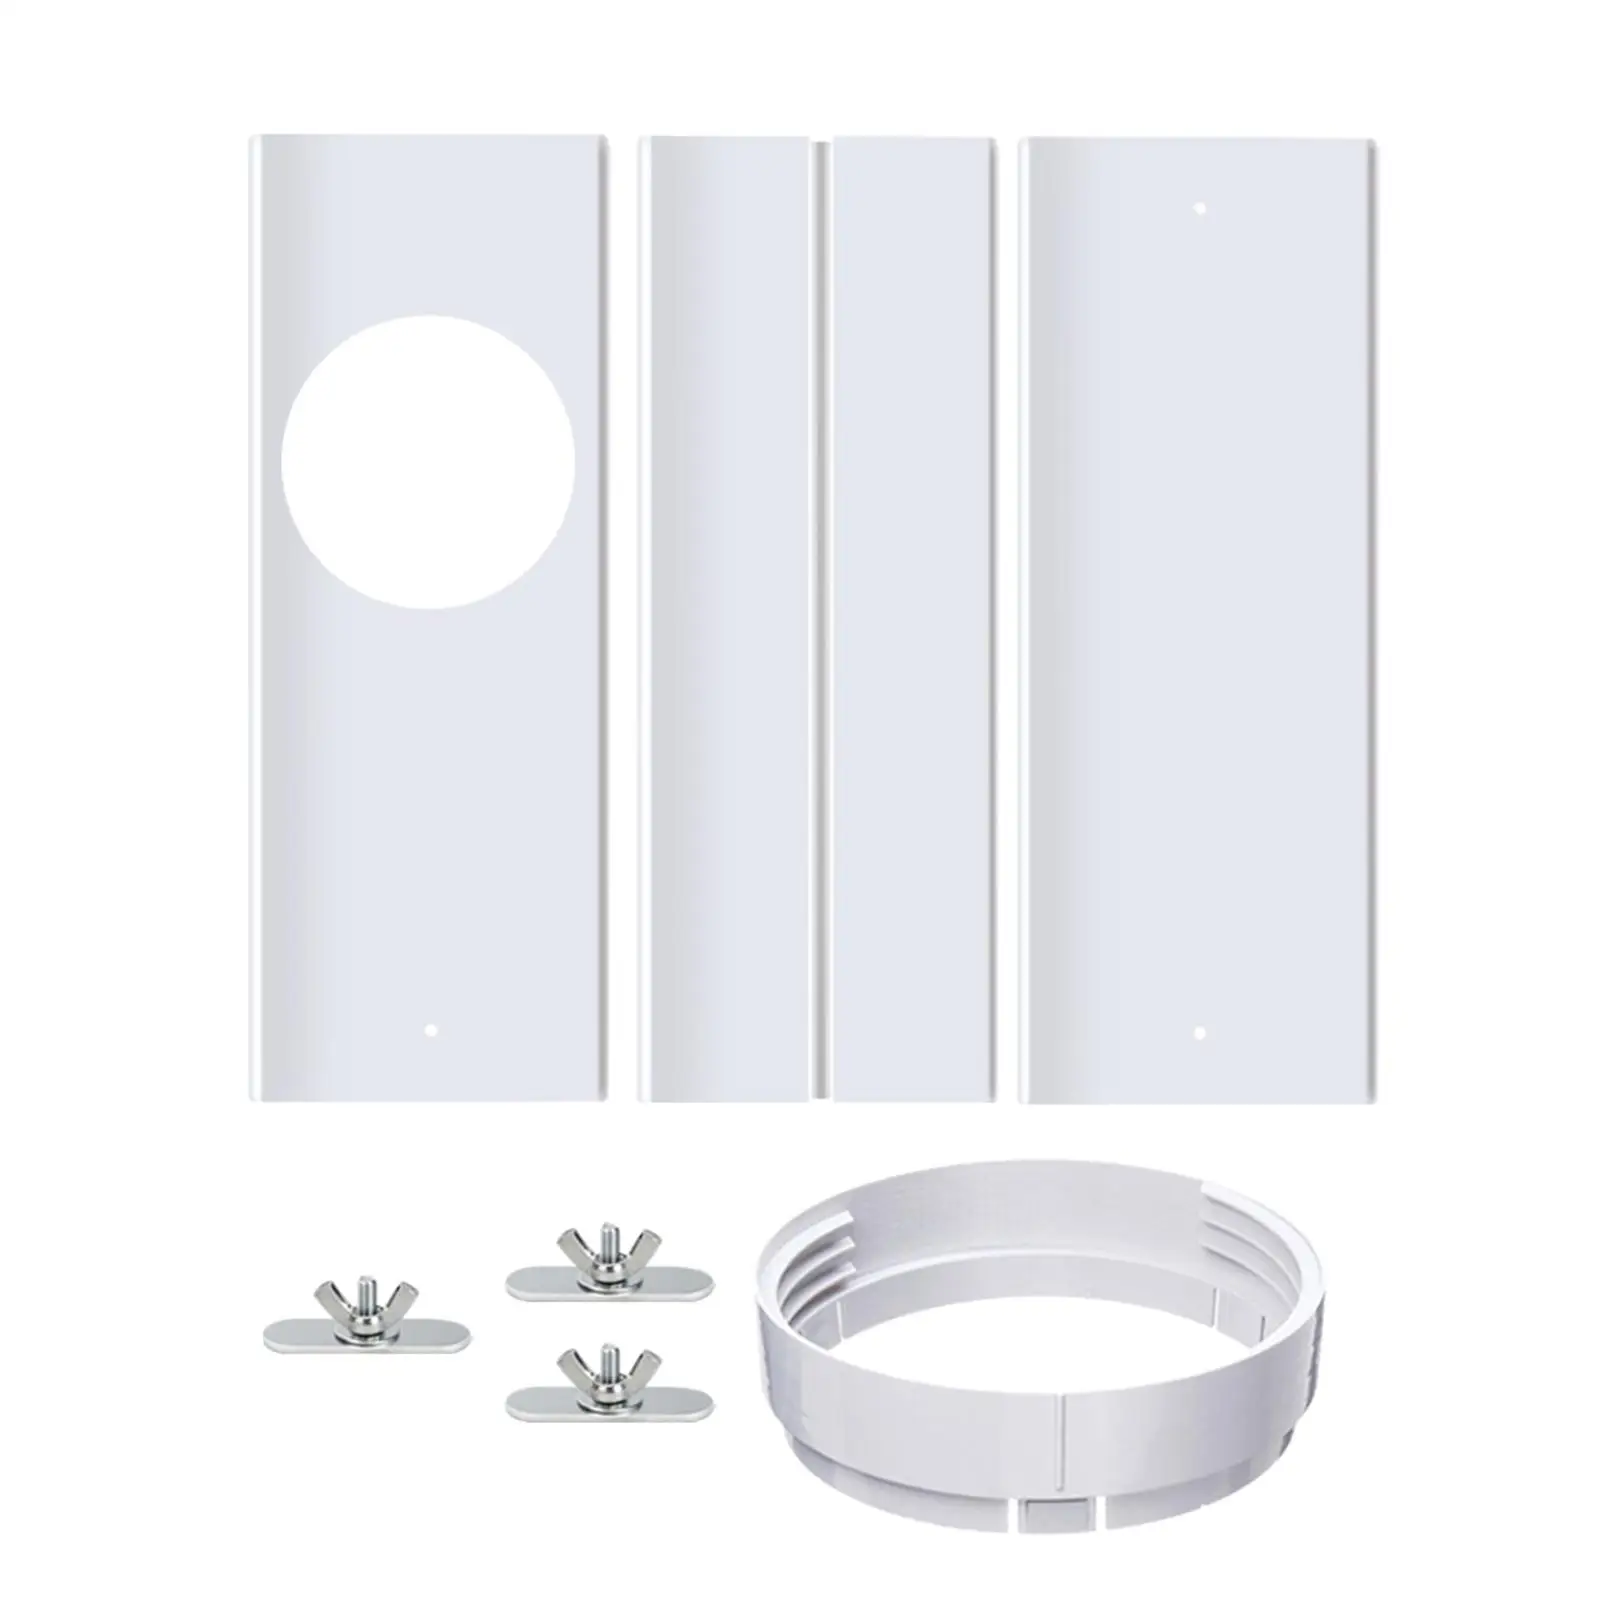 Conditioner Kit Seal Adapter Air Conditioner Window Kit for Window